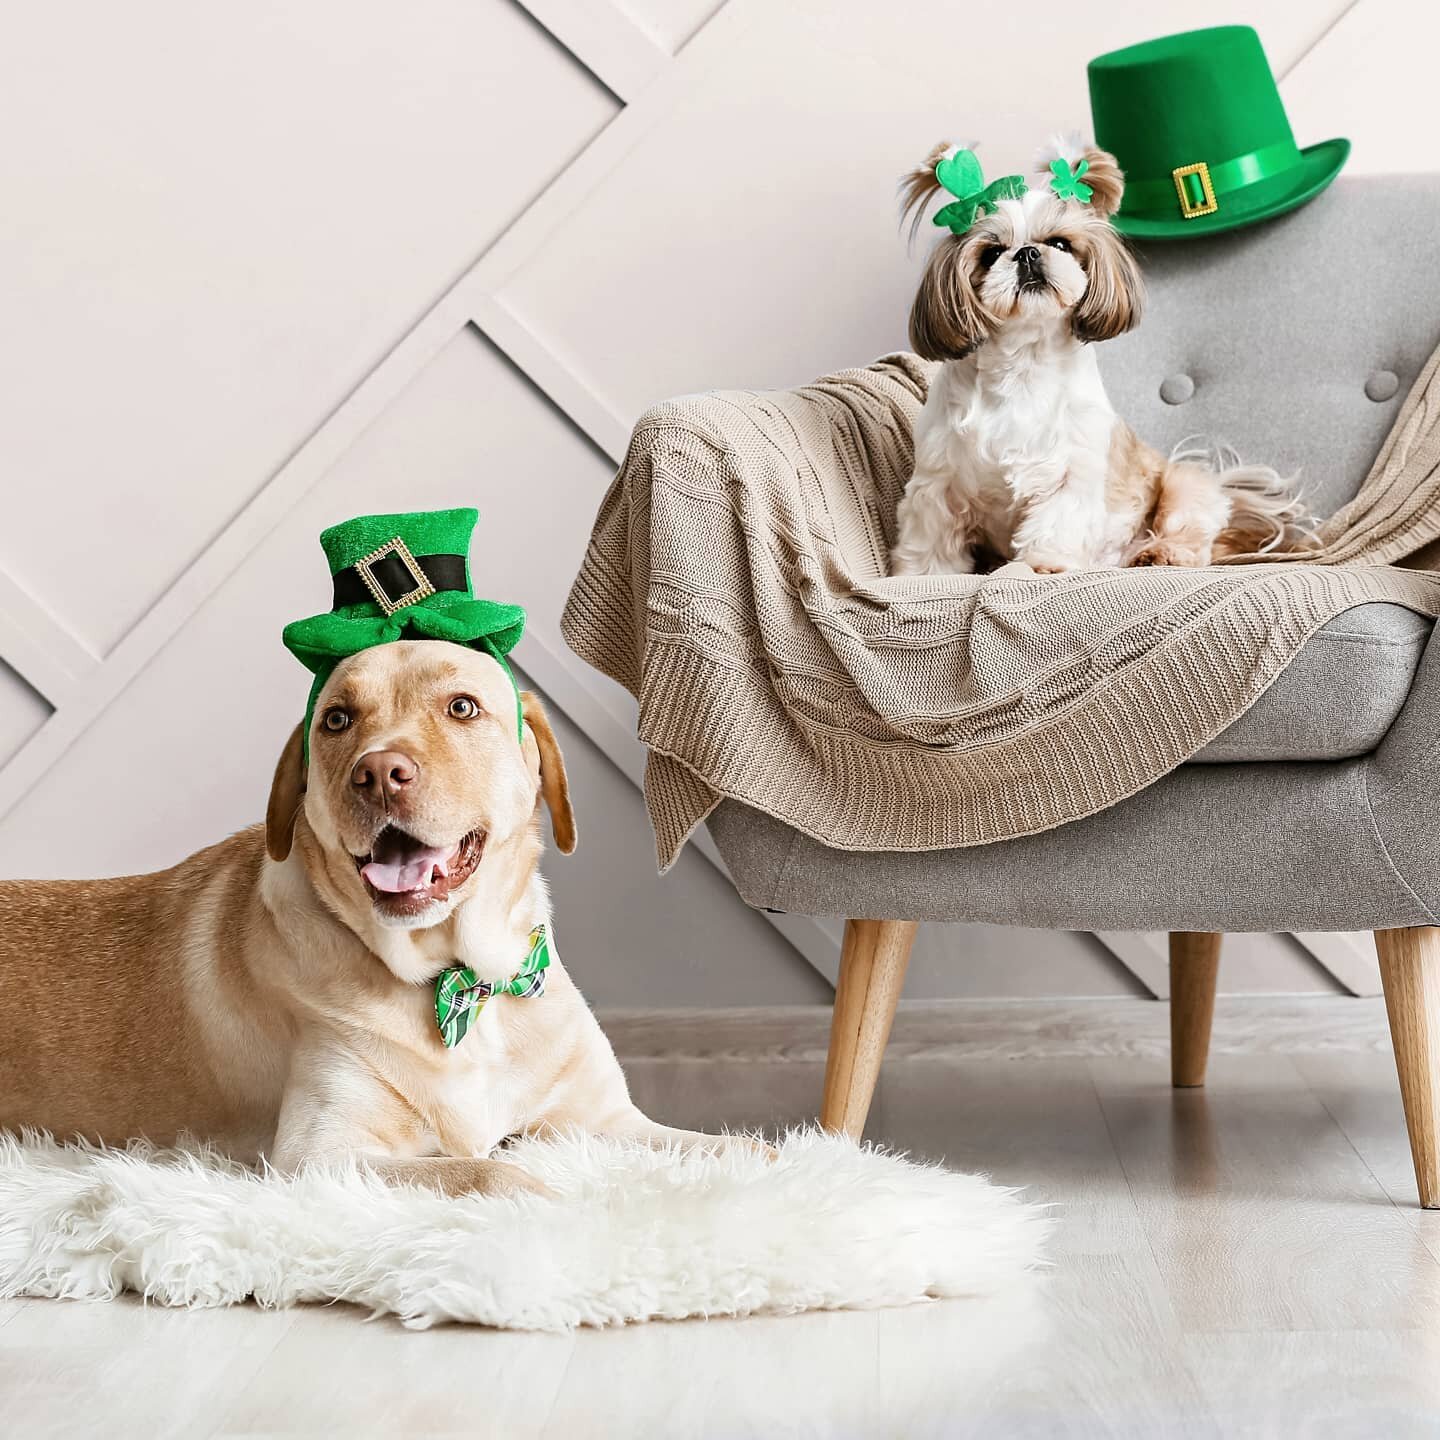 🐶 Happy St. Patrick's Day from our Lucky Friends! 💚
#StPatricksDay #doglovers #lucky